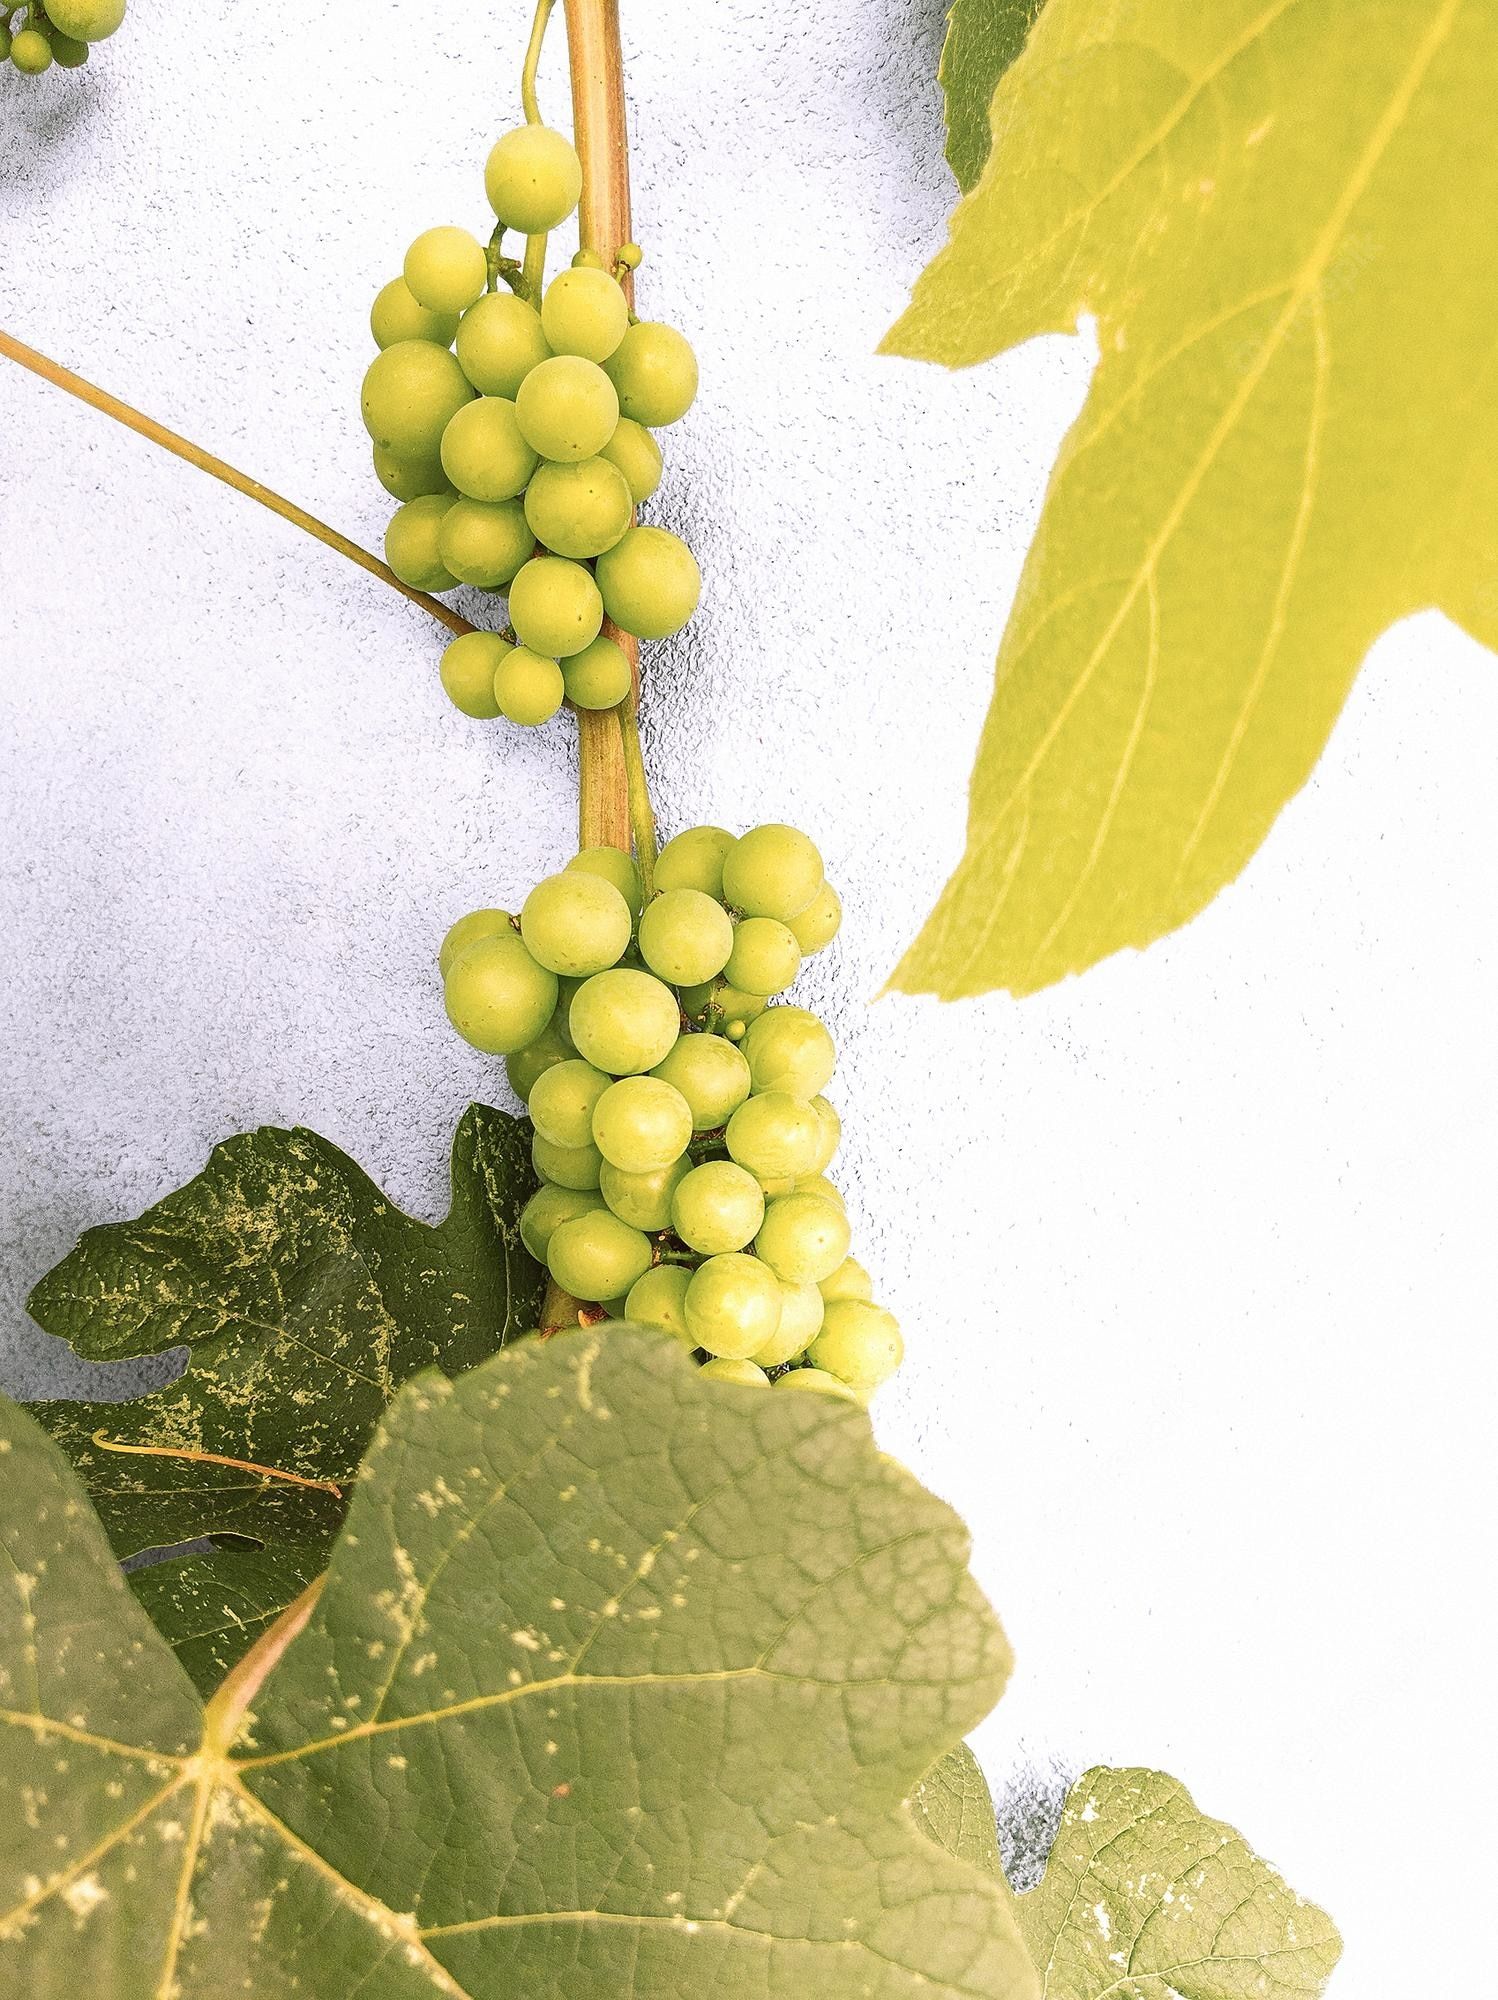 A close up of some grapes on the vine - Travel